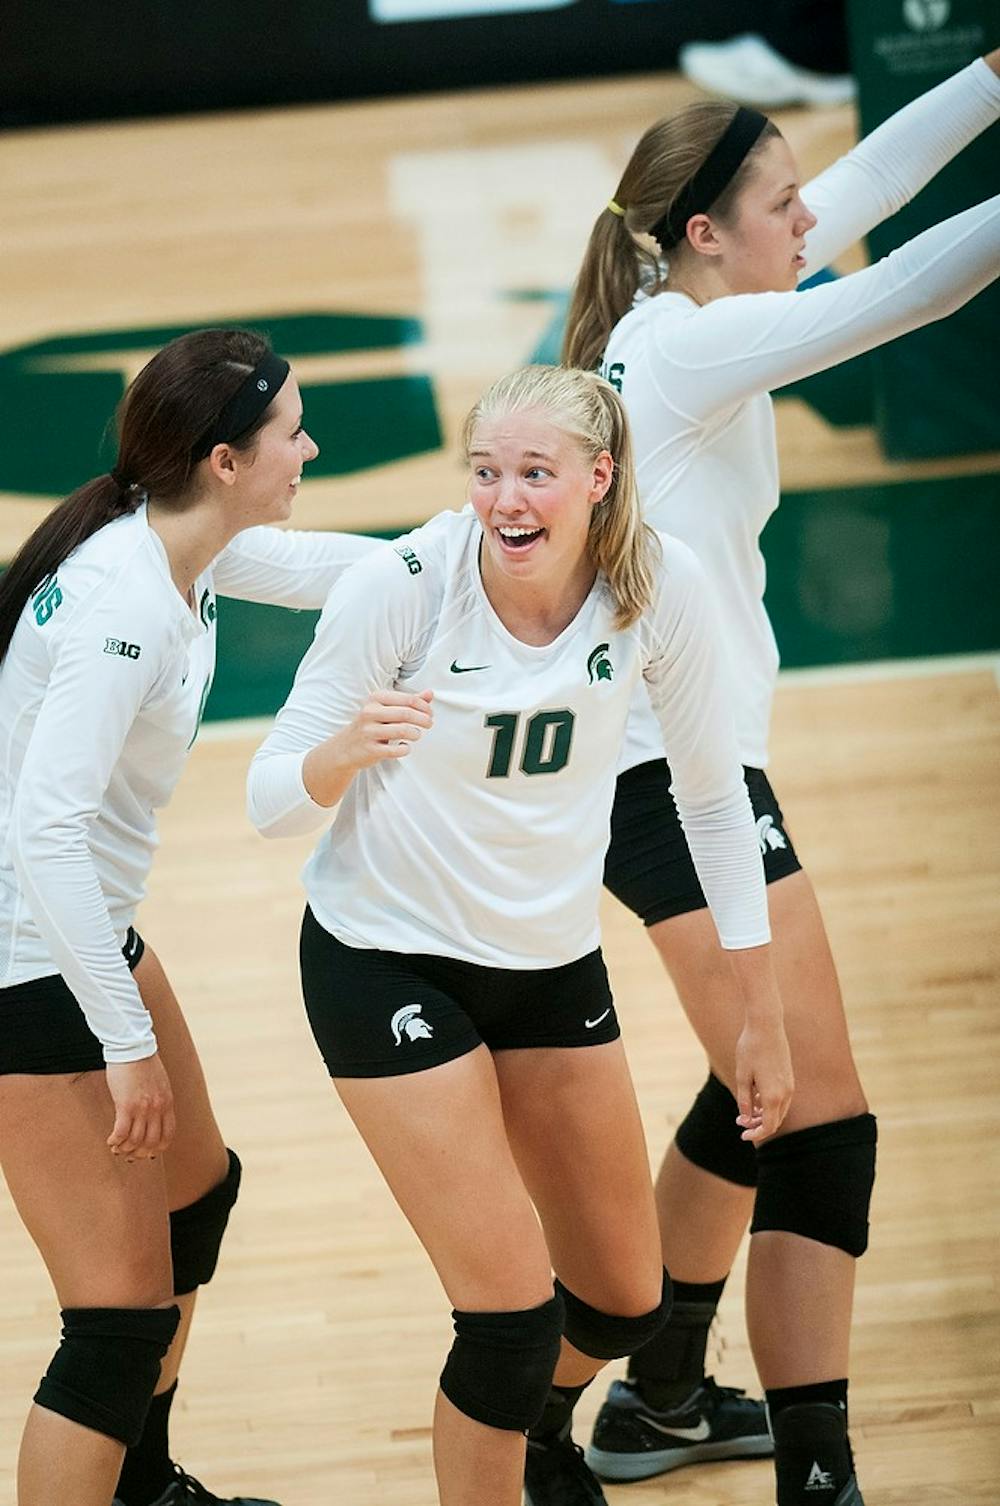 	<p>Senior middle blocker Kelsey Kuipers laughs with teammates between serves during the Green and White match, Aug. 24, 2013, at Jenison Field House. The White Team won, 2-1. Danyelle Morrow/The State News</p>